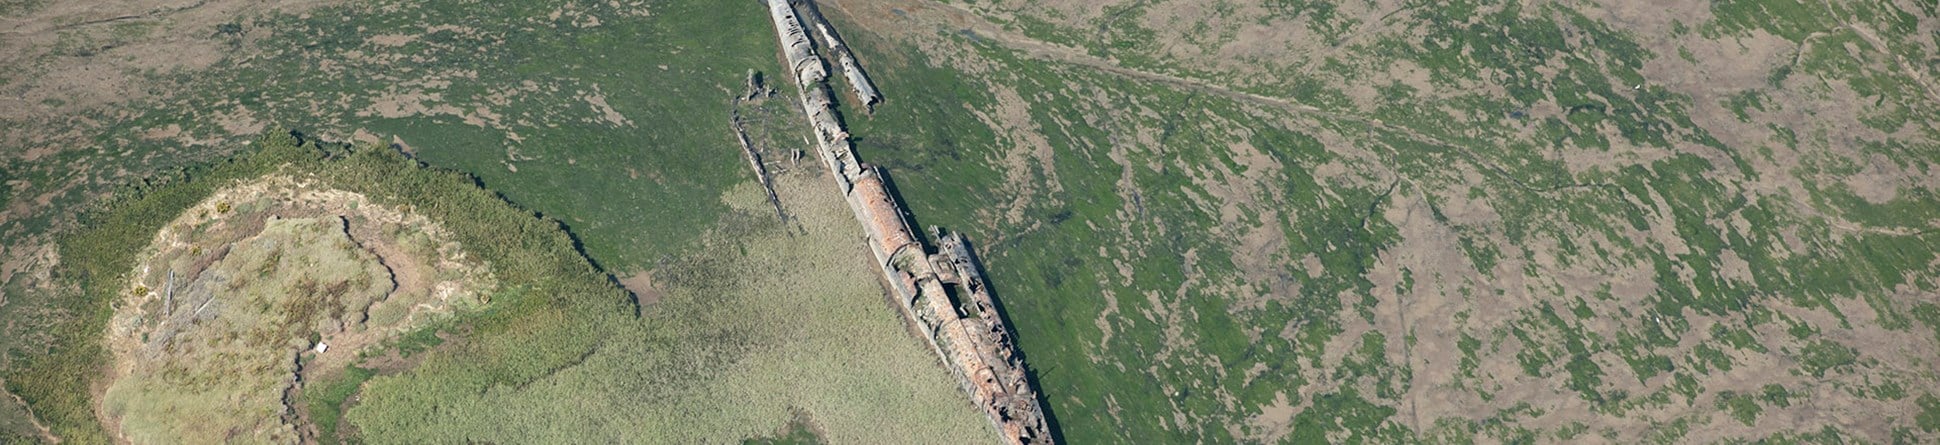 The River Medway, the rusting, skeletal remains of a German U-boat, believed to be UB122, which broke its tow while on its way to a scrapyard, lie preserved in tidal mudflats